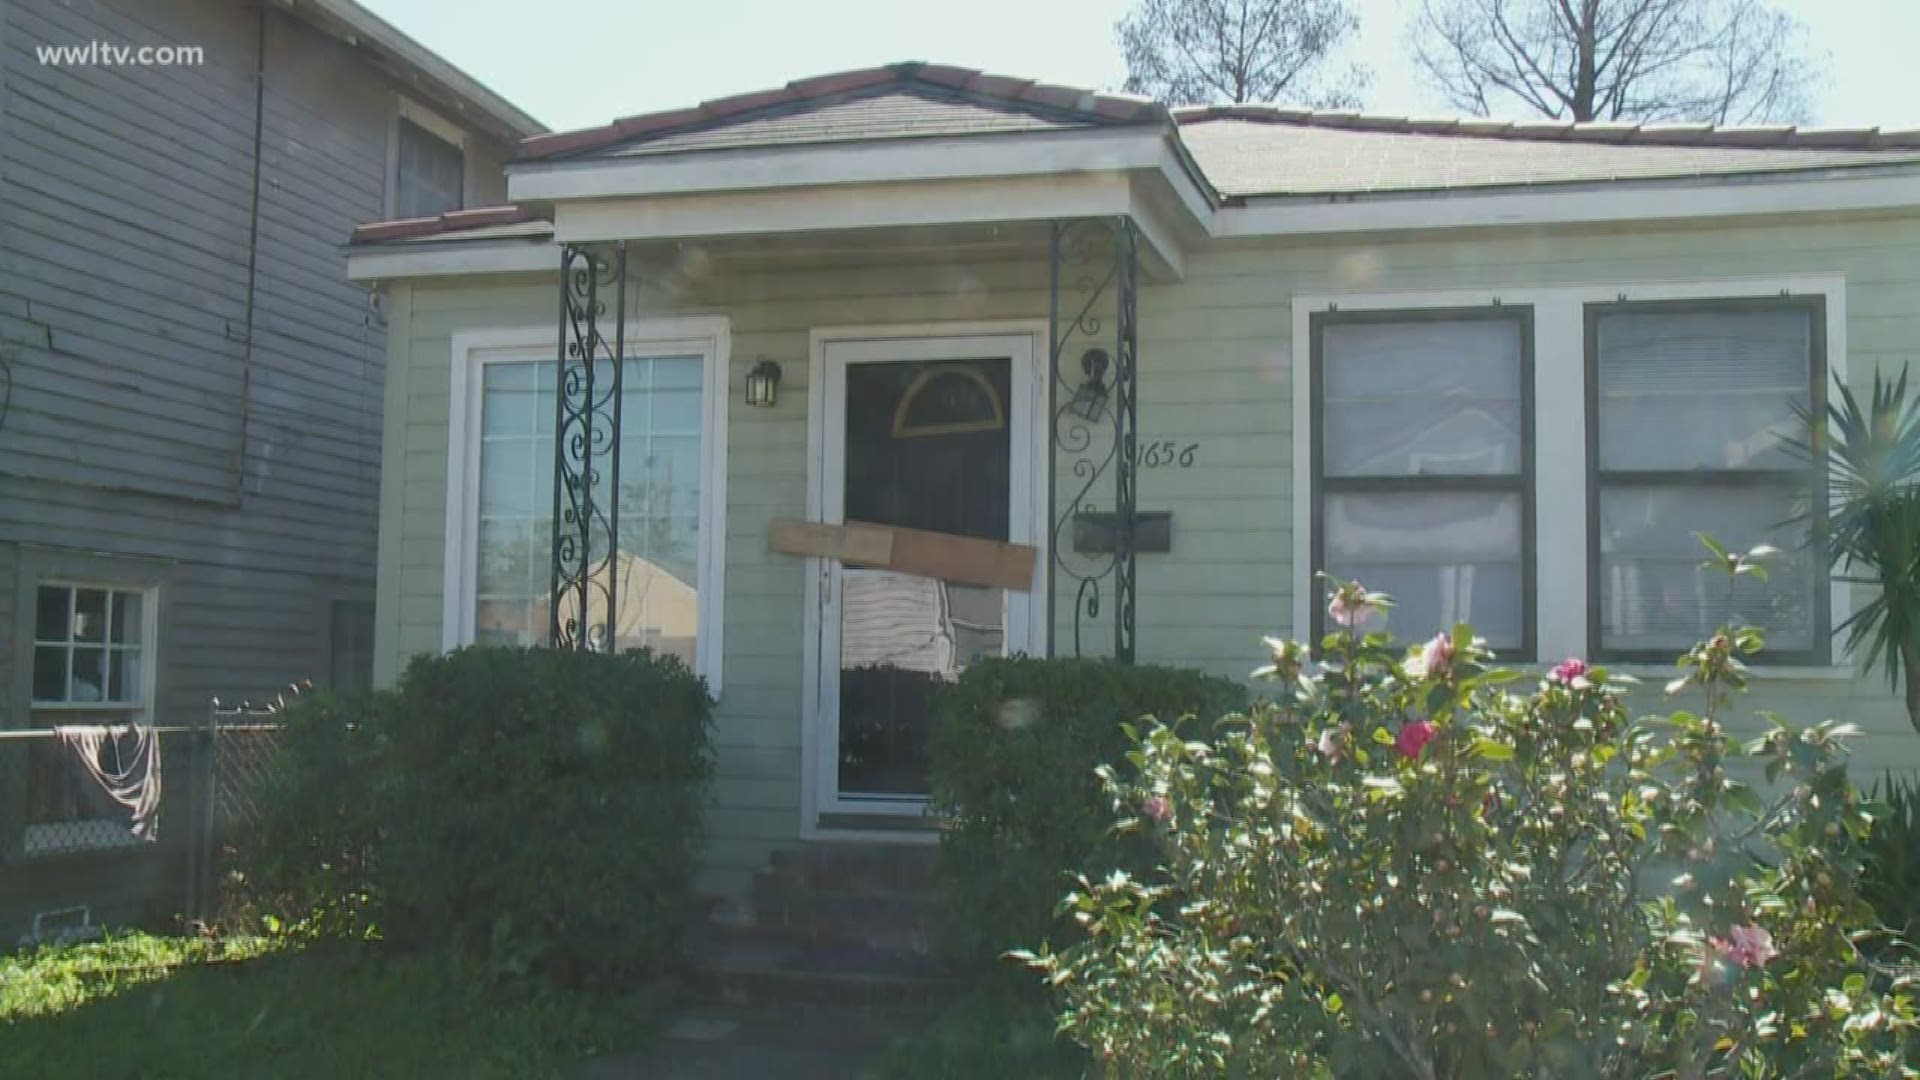 Neighbors are confused why the 70-year-old man was a target.